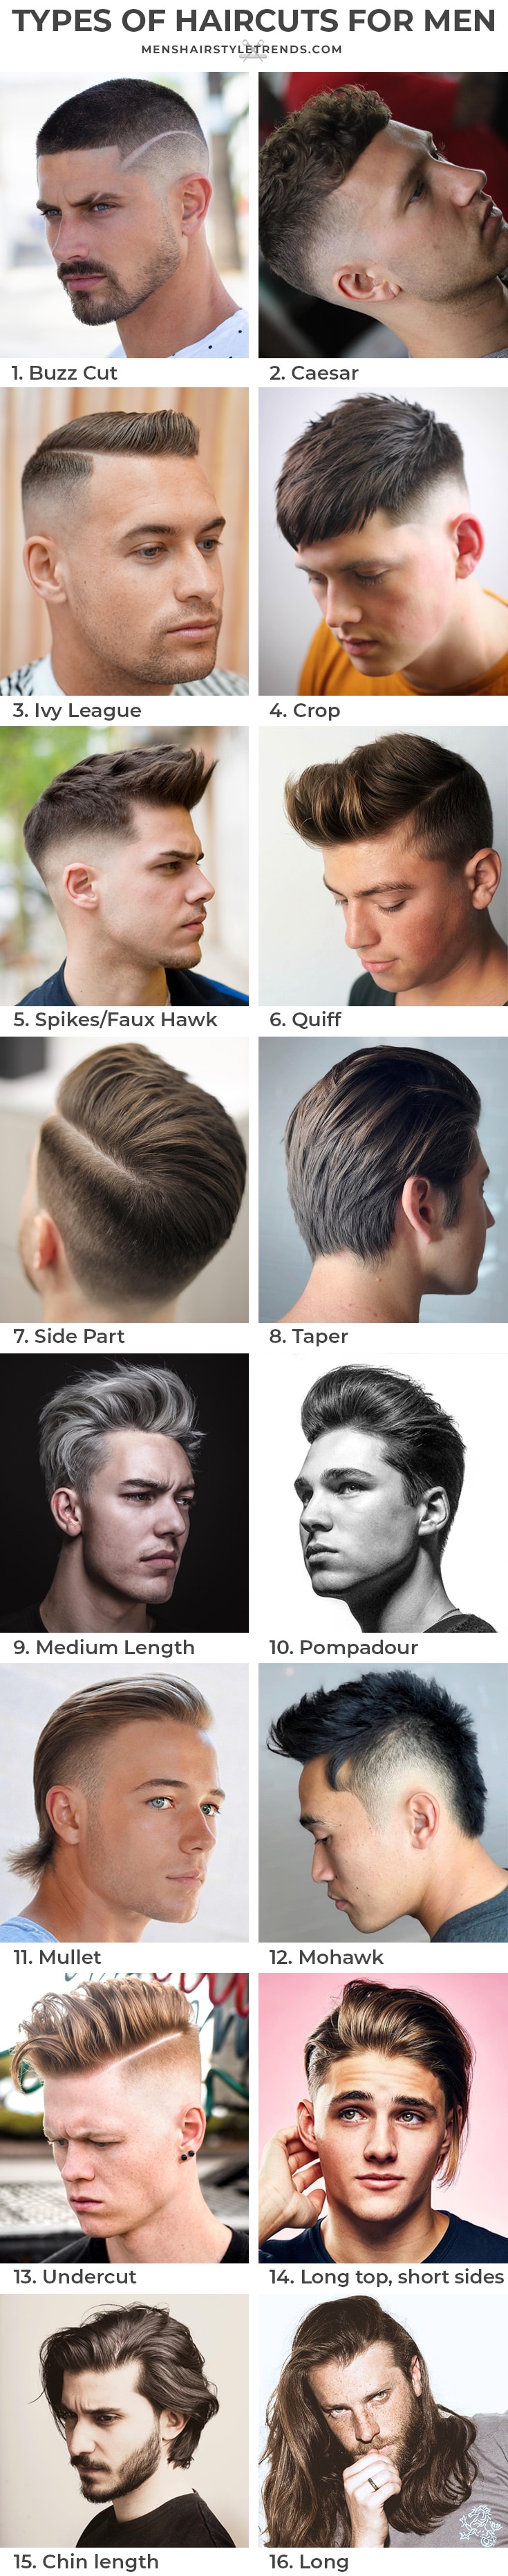 types of haircuts for men